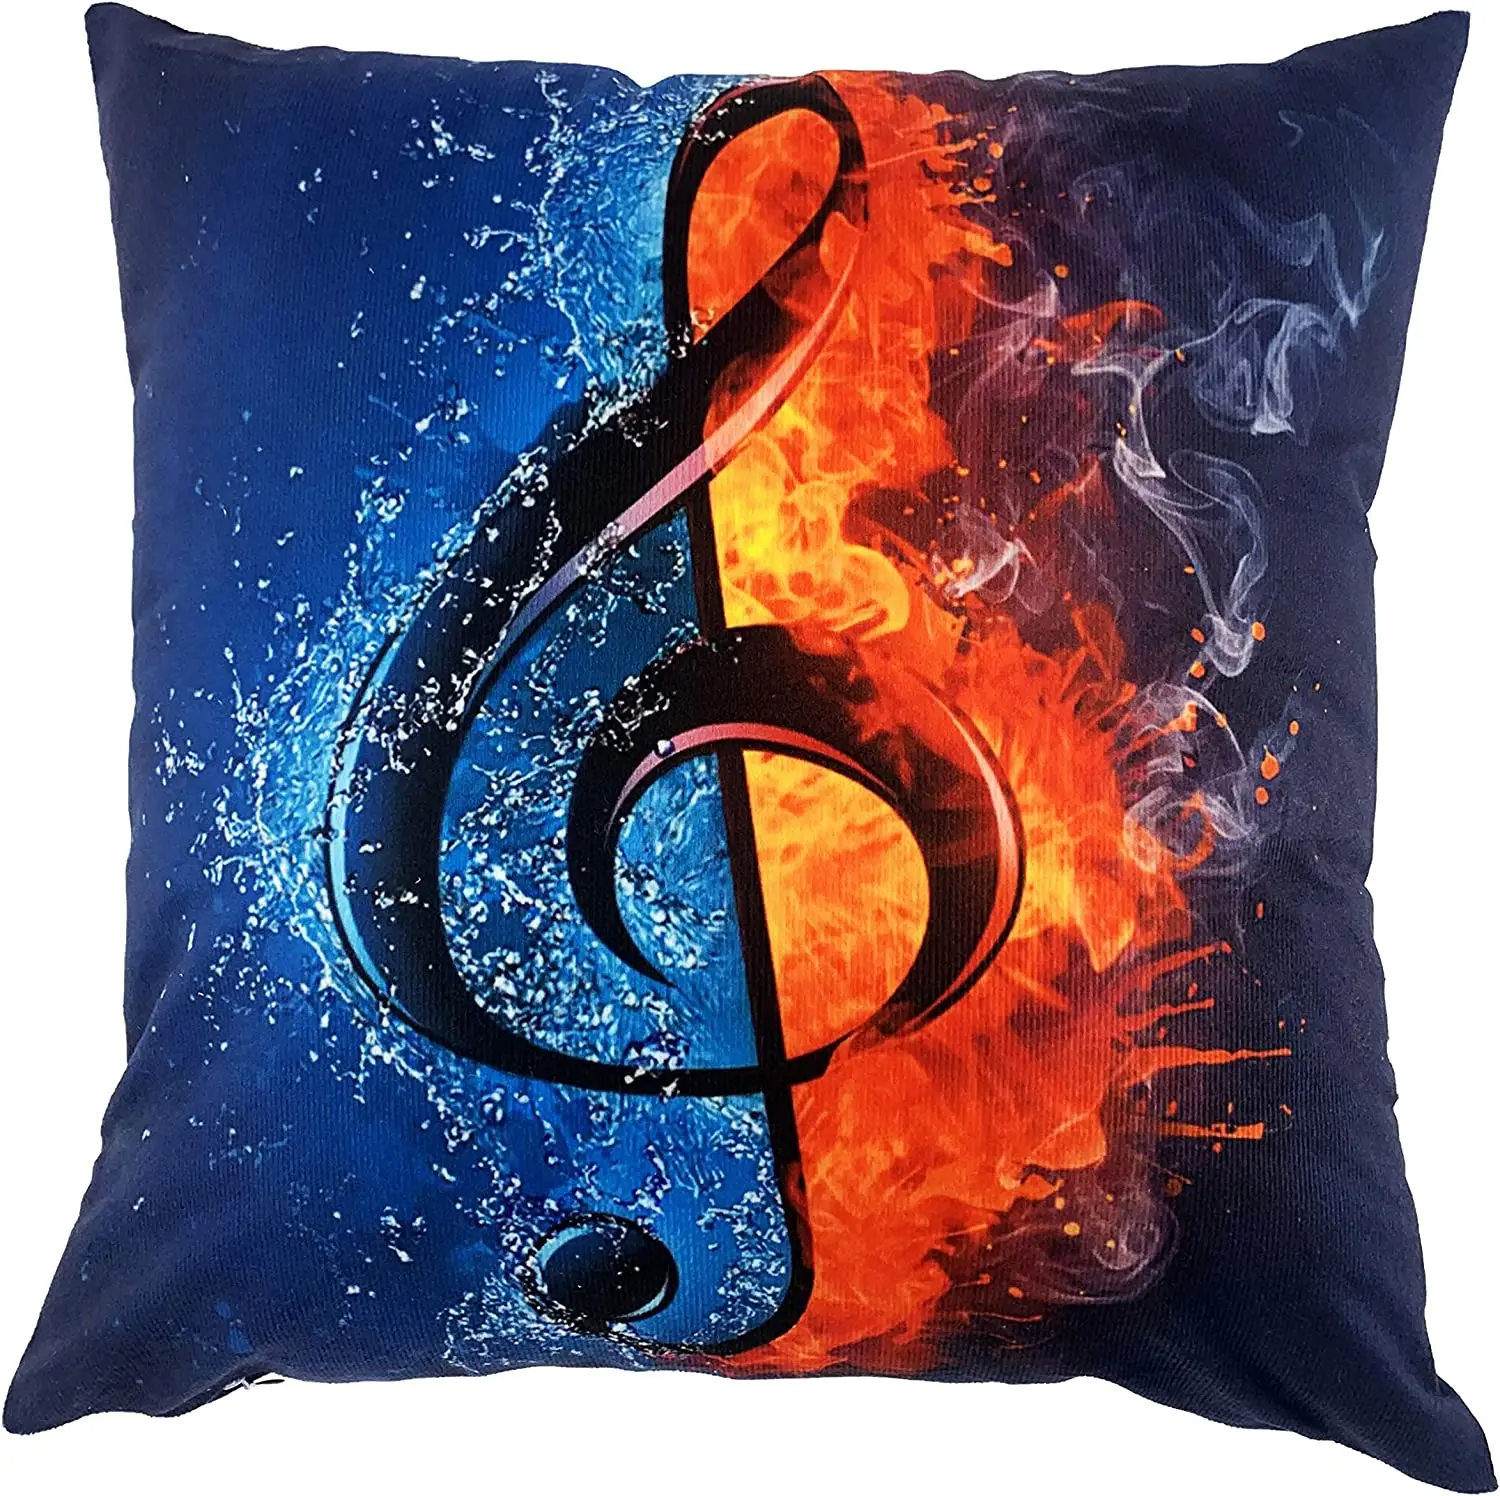 

N Nebont Musical Symbol Flame Throw Pillow Covers Pillowcase Zippered Square Decorative Cushion Cases 18x18 Inches for Couch